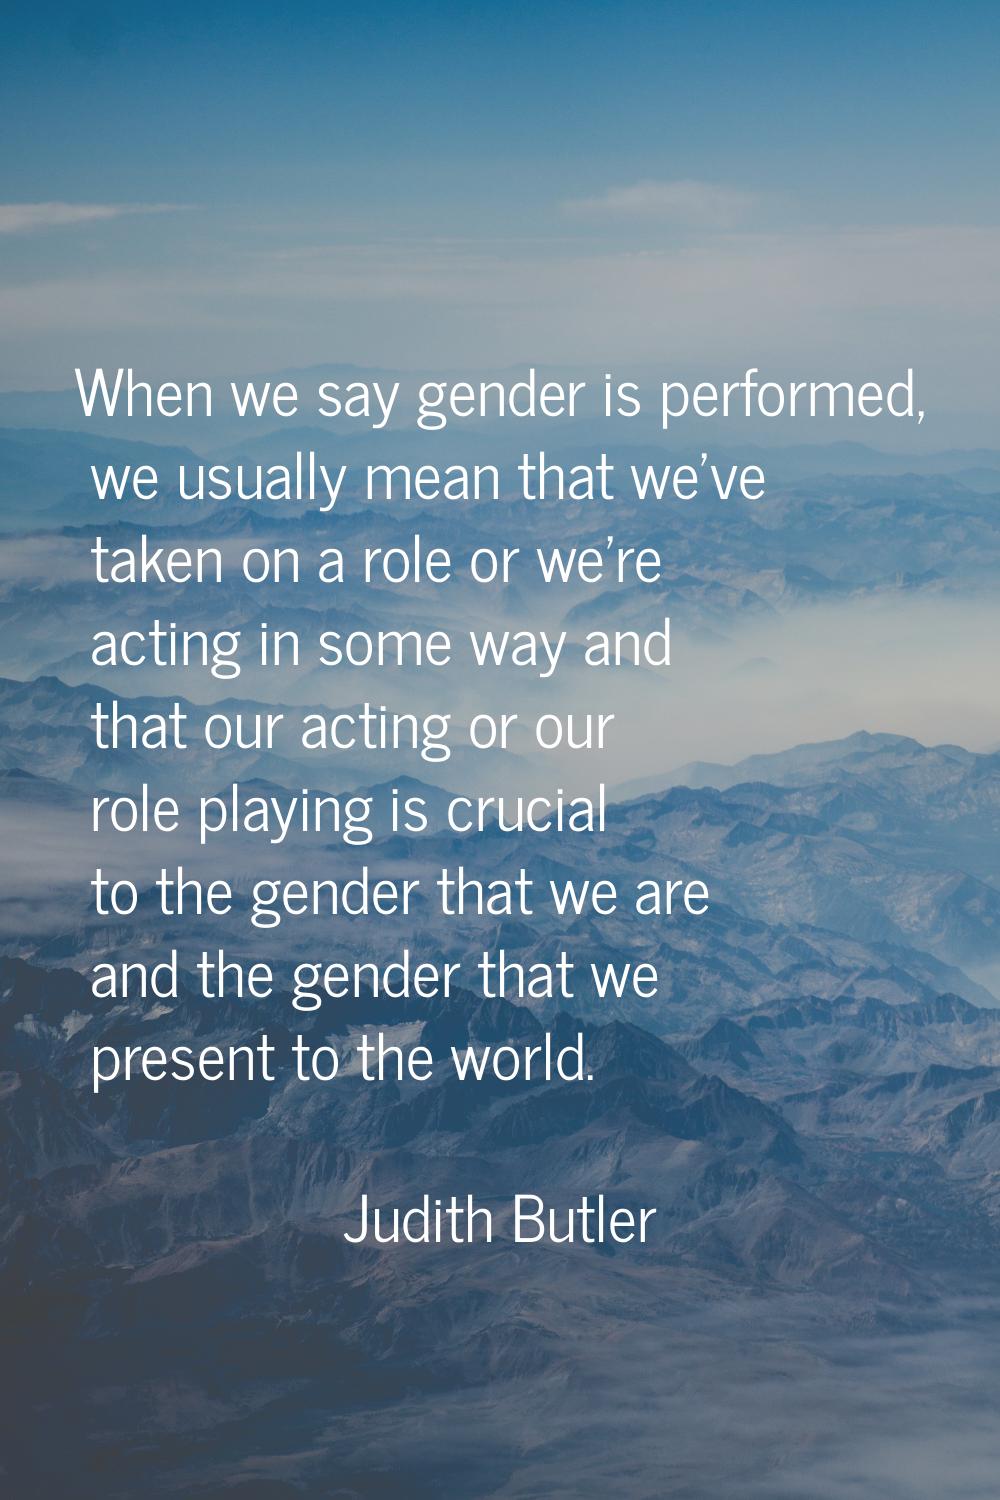 When we say gender is performed, we usually mean that we've taken on a role or we're acting in some